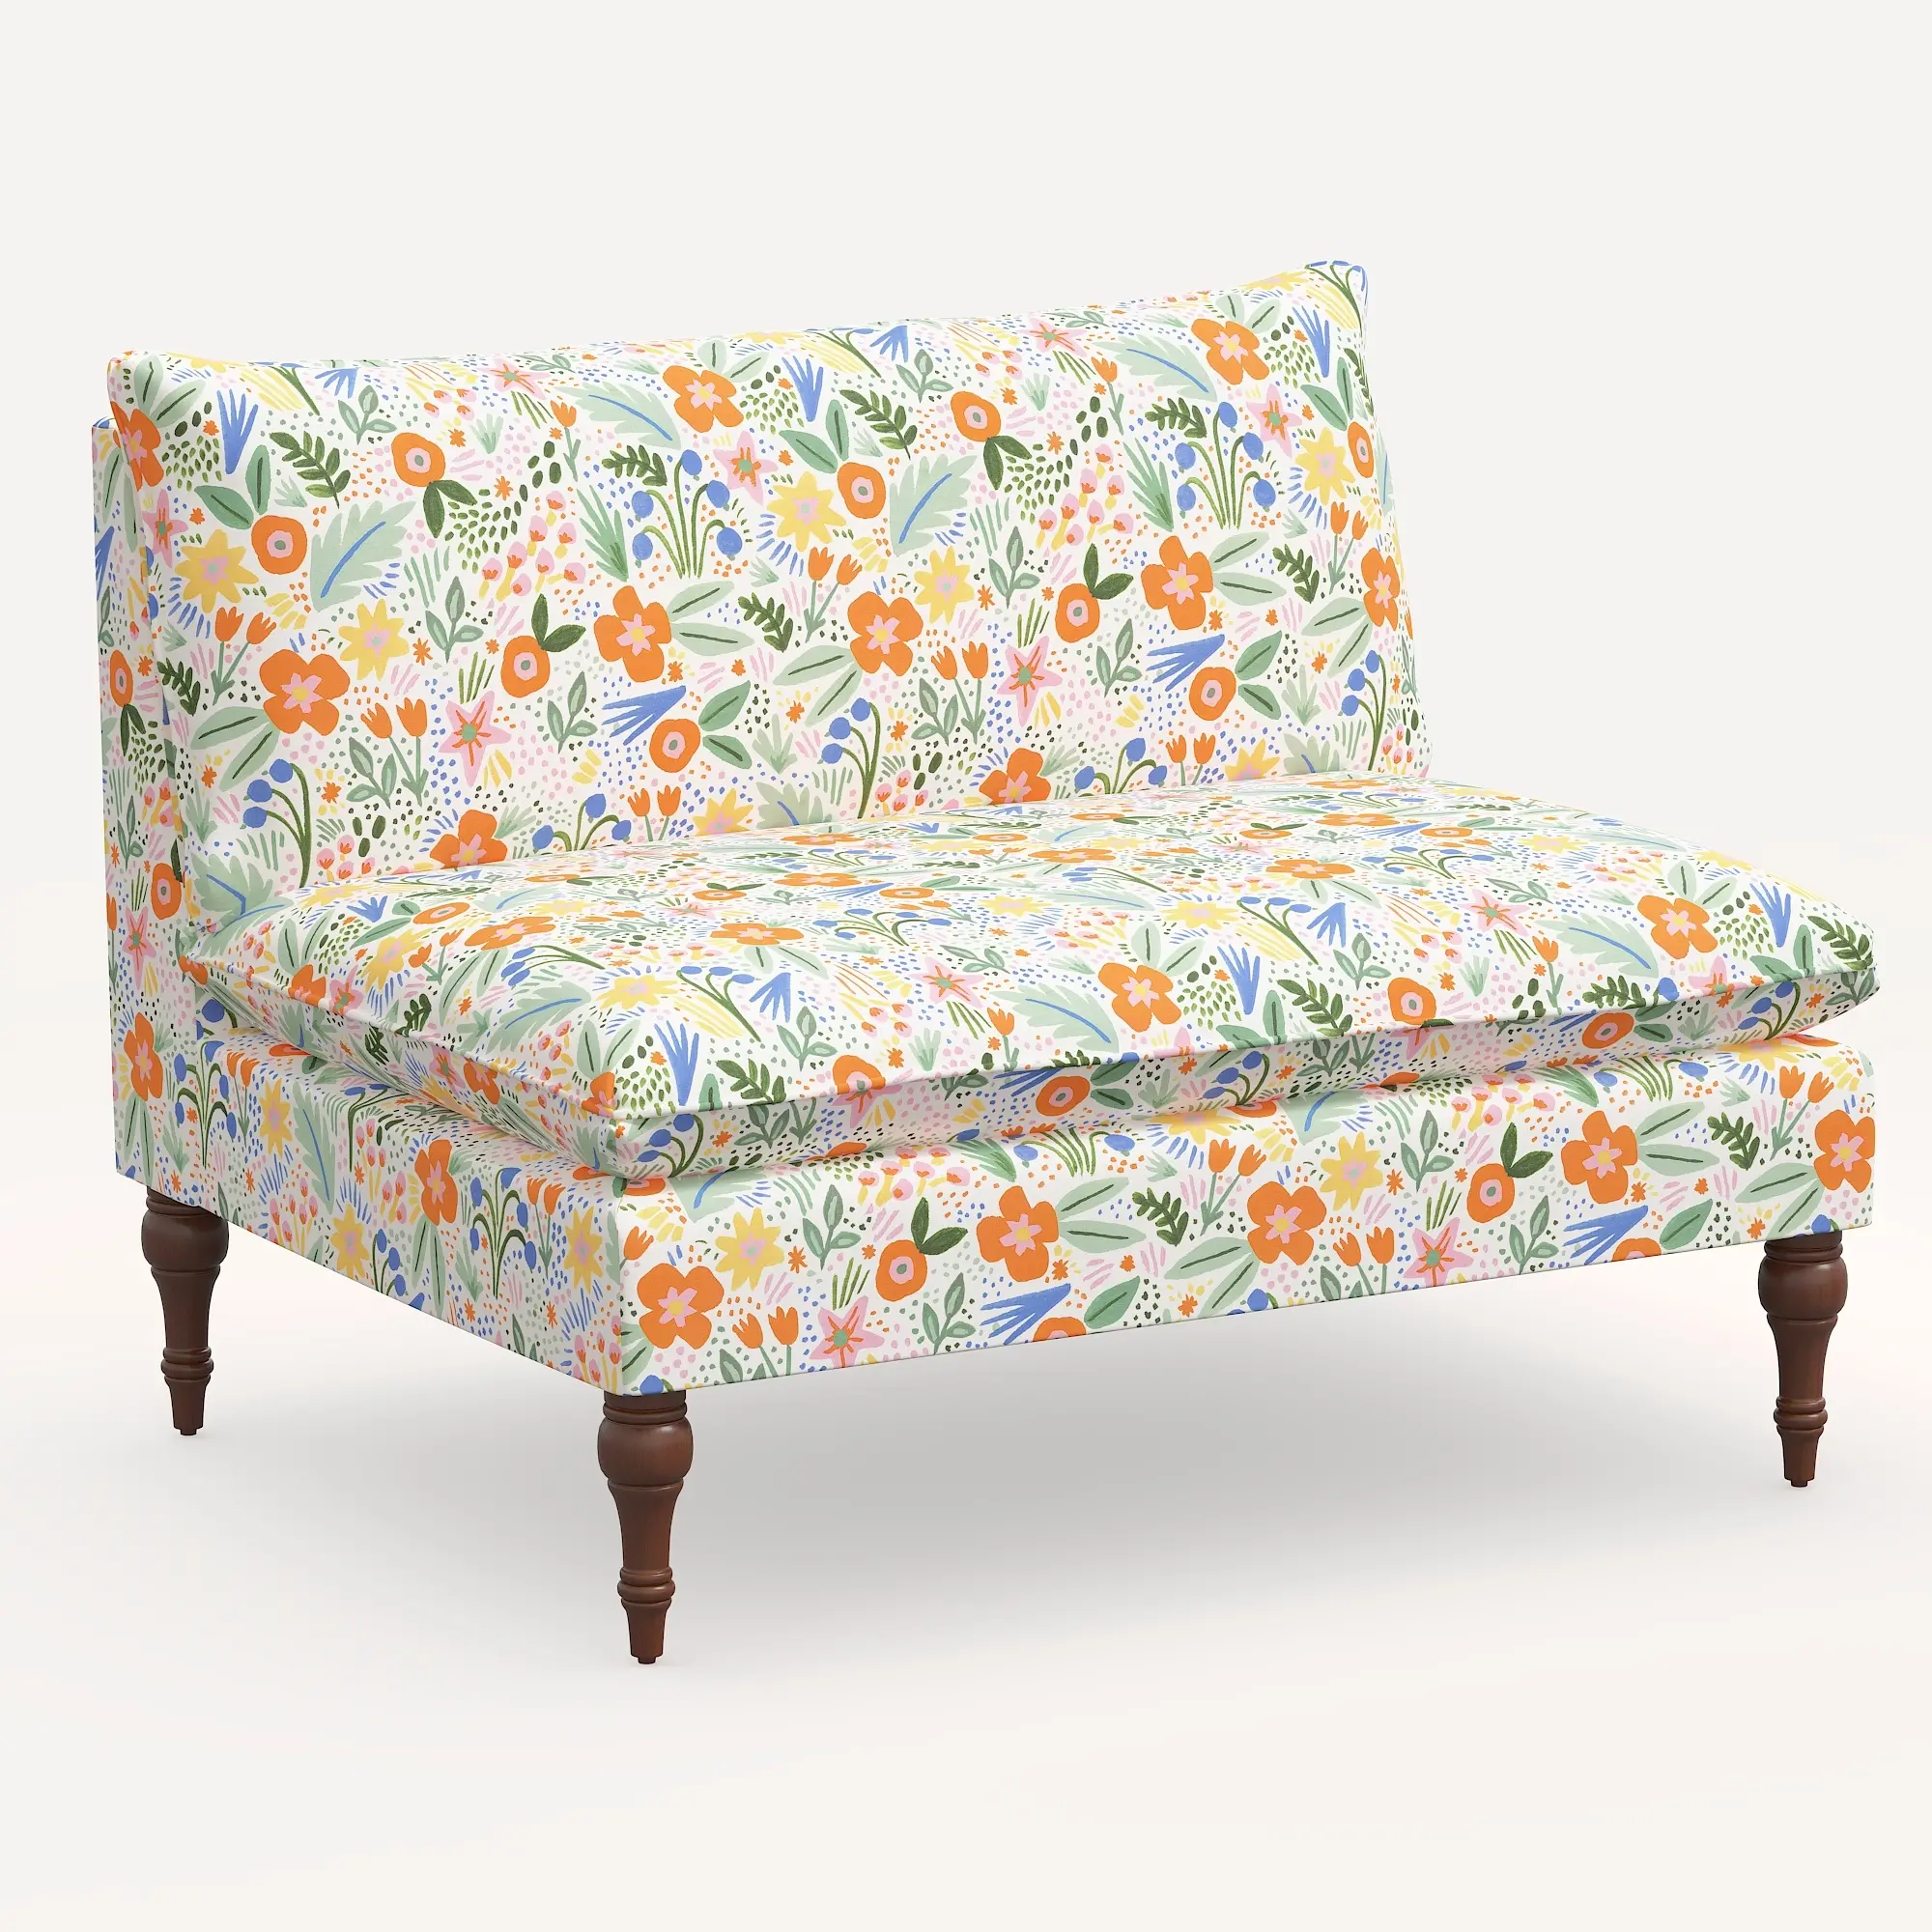 Rifle Paper Co. Louie Multi Color Floral Armless Loveseat